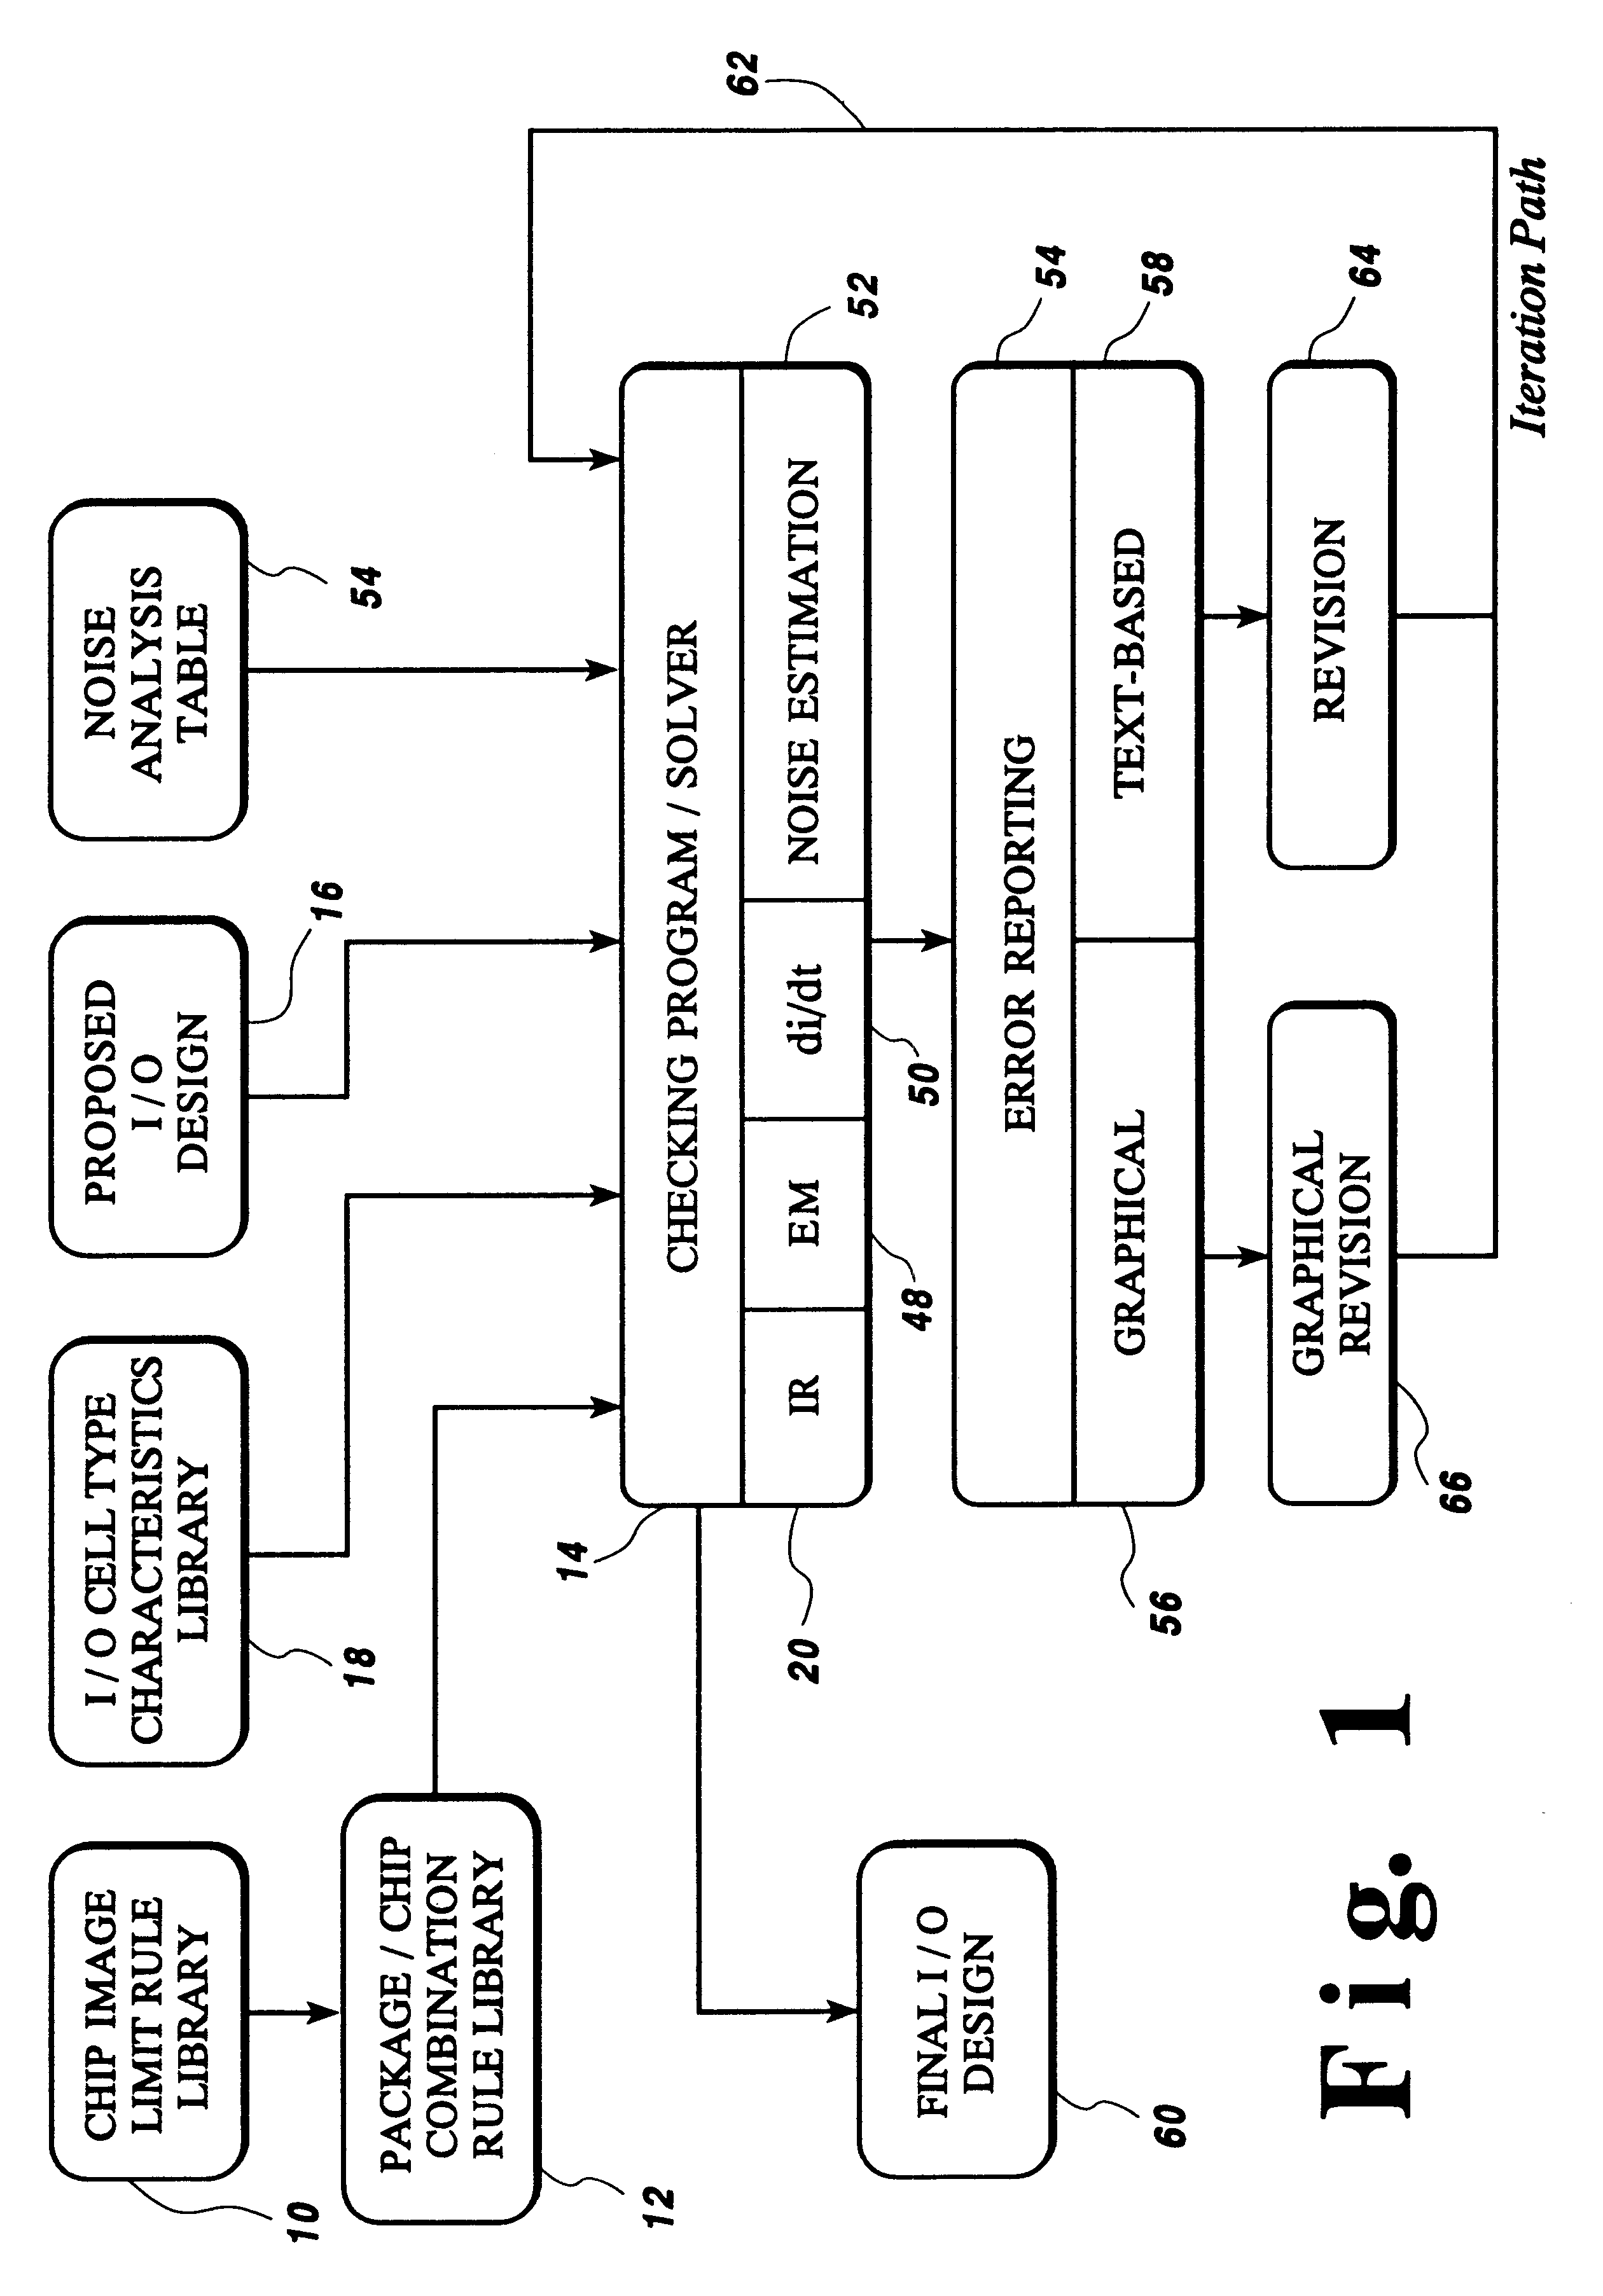 Fast method of I/O circuit placement and electrical rule checking